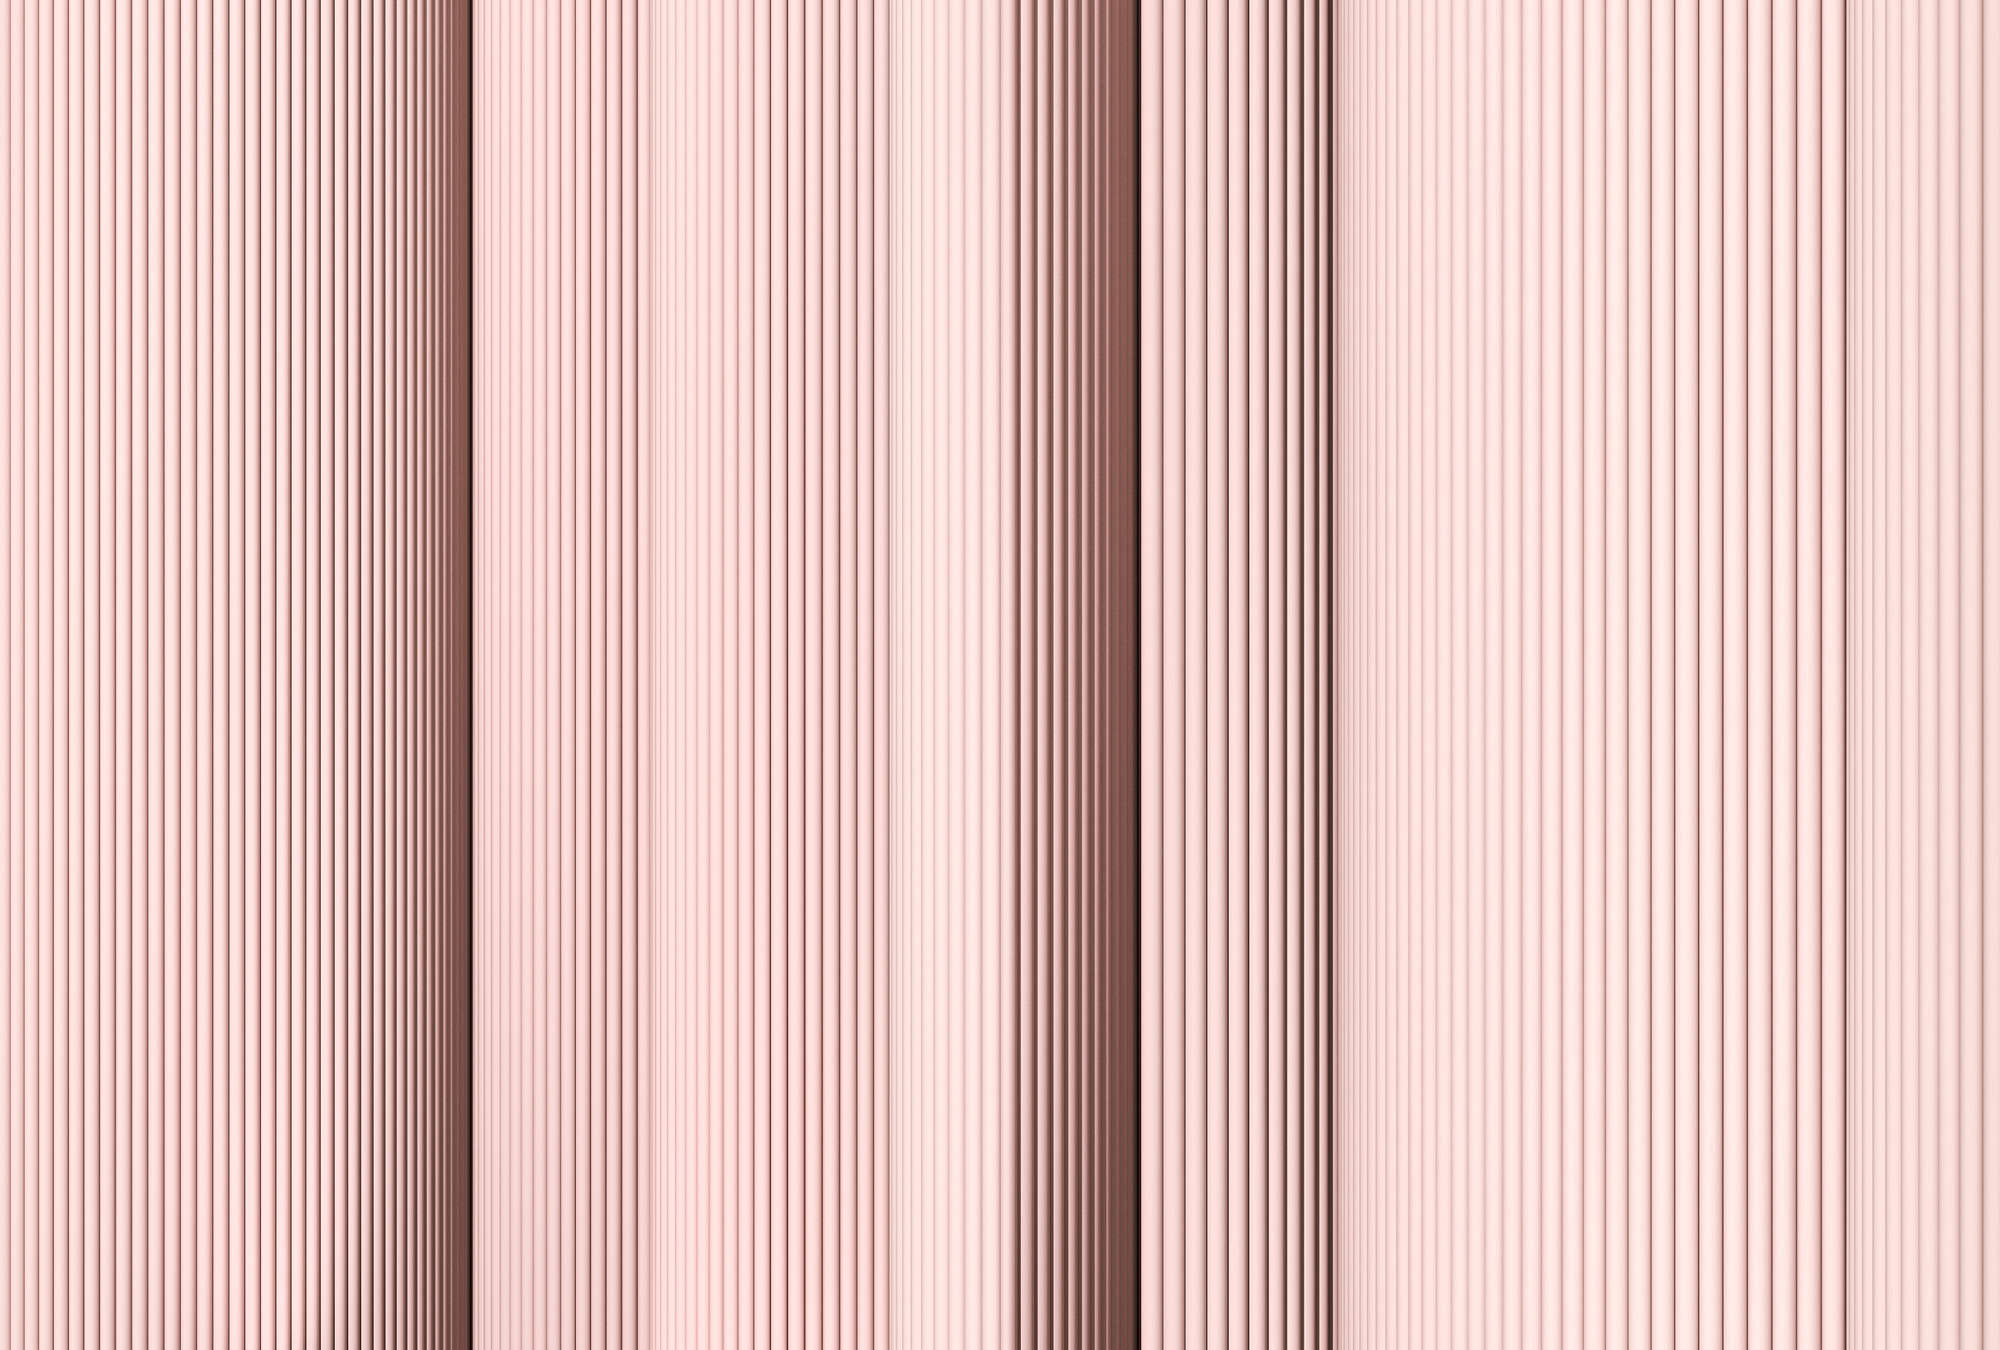             Magic Wall 4 - stripes photo wallpaper with 3D illusion effect, pink & white
        